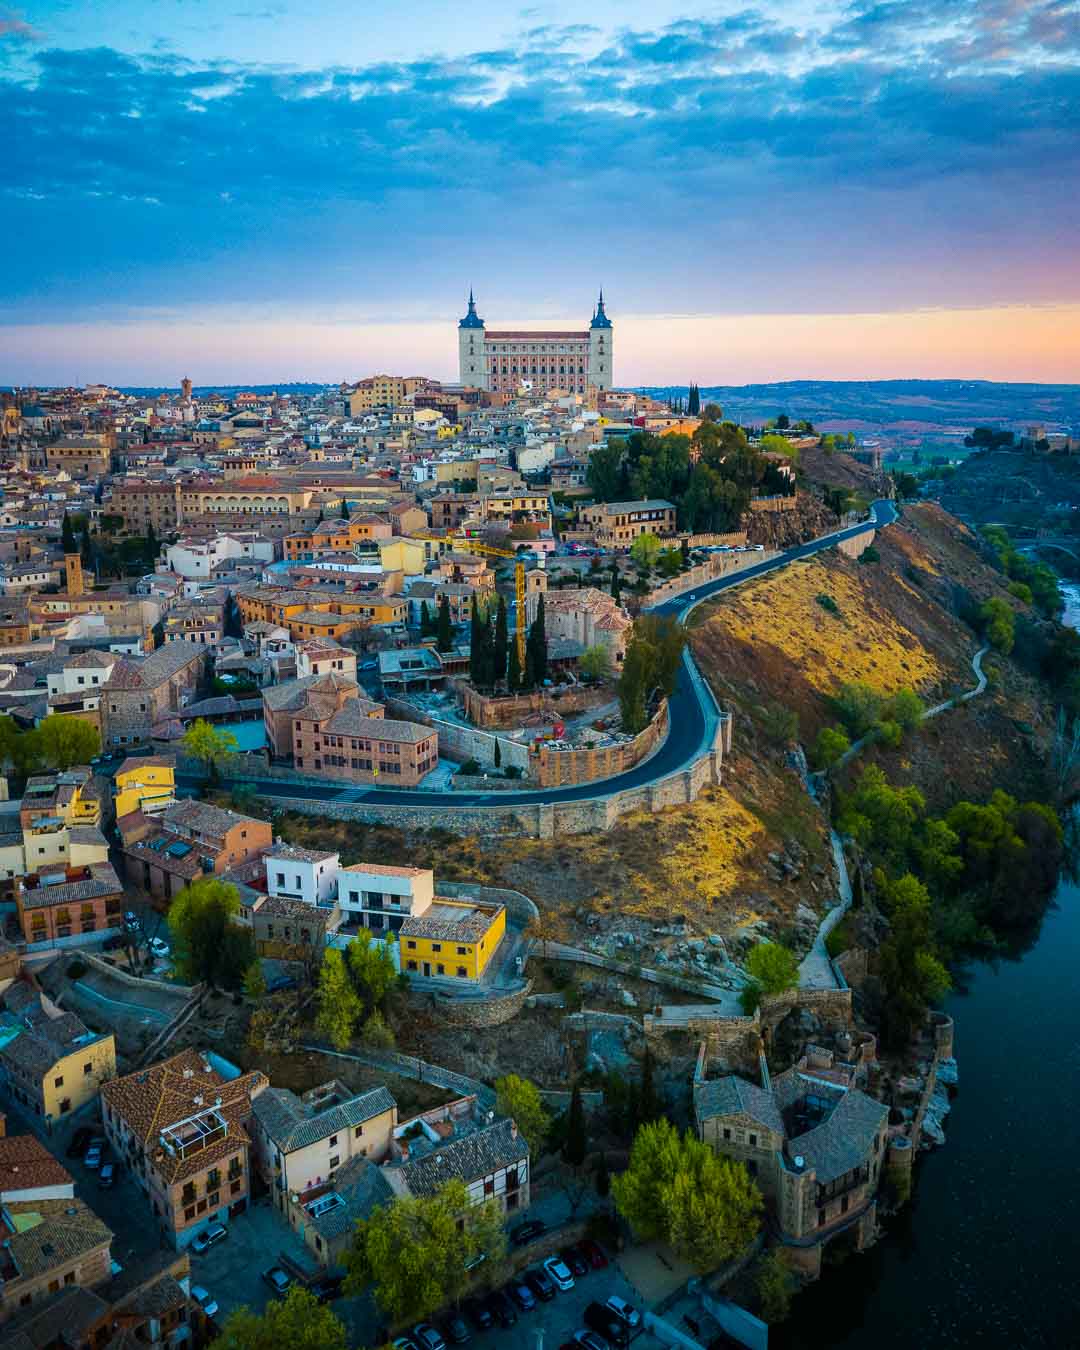 view over the castle of toledo